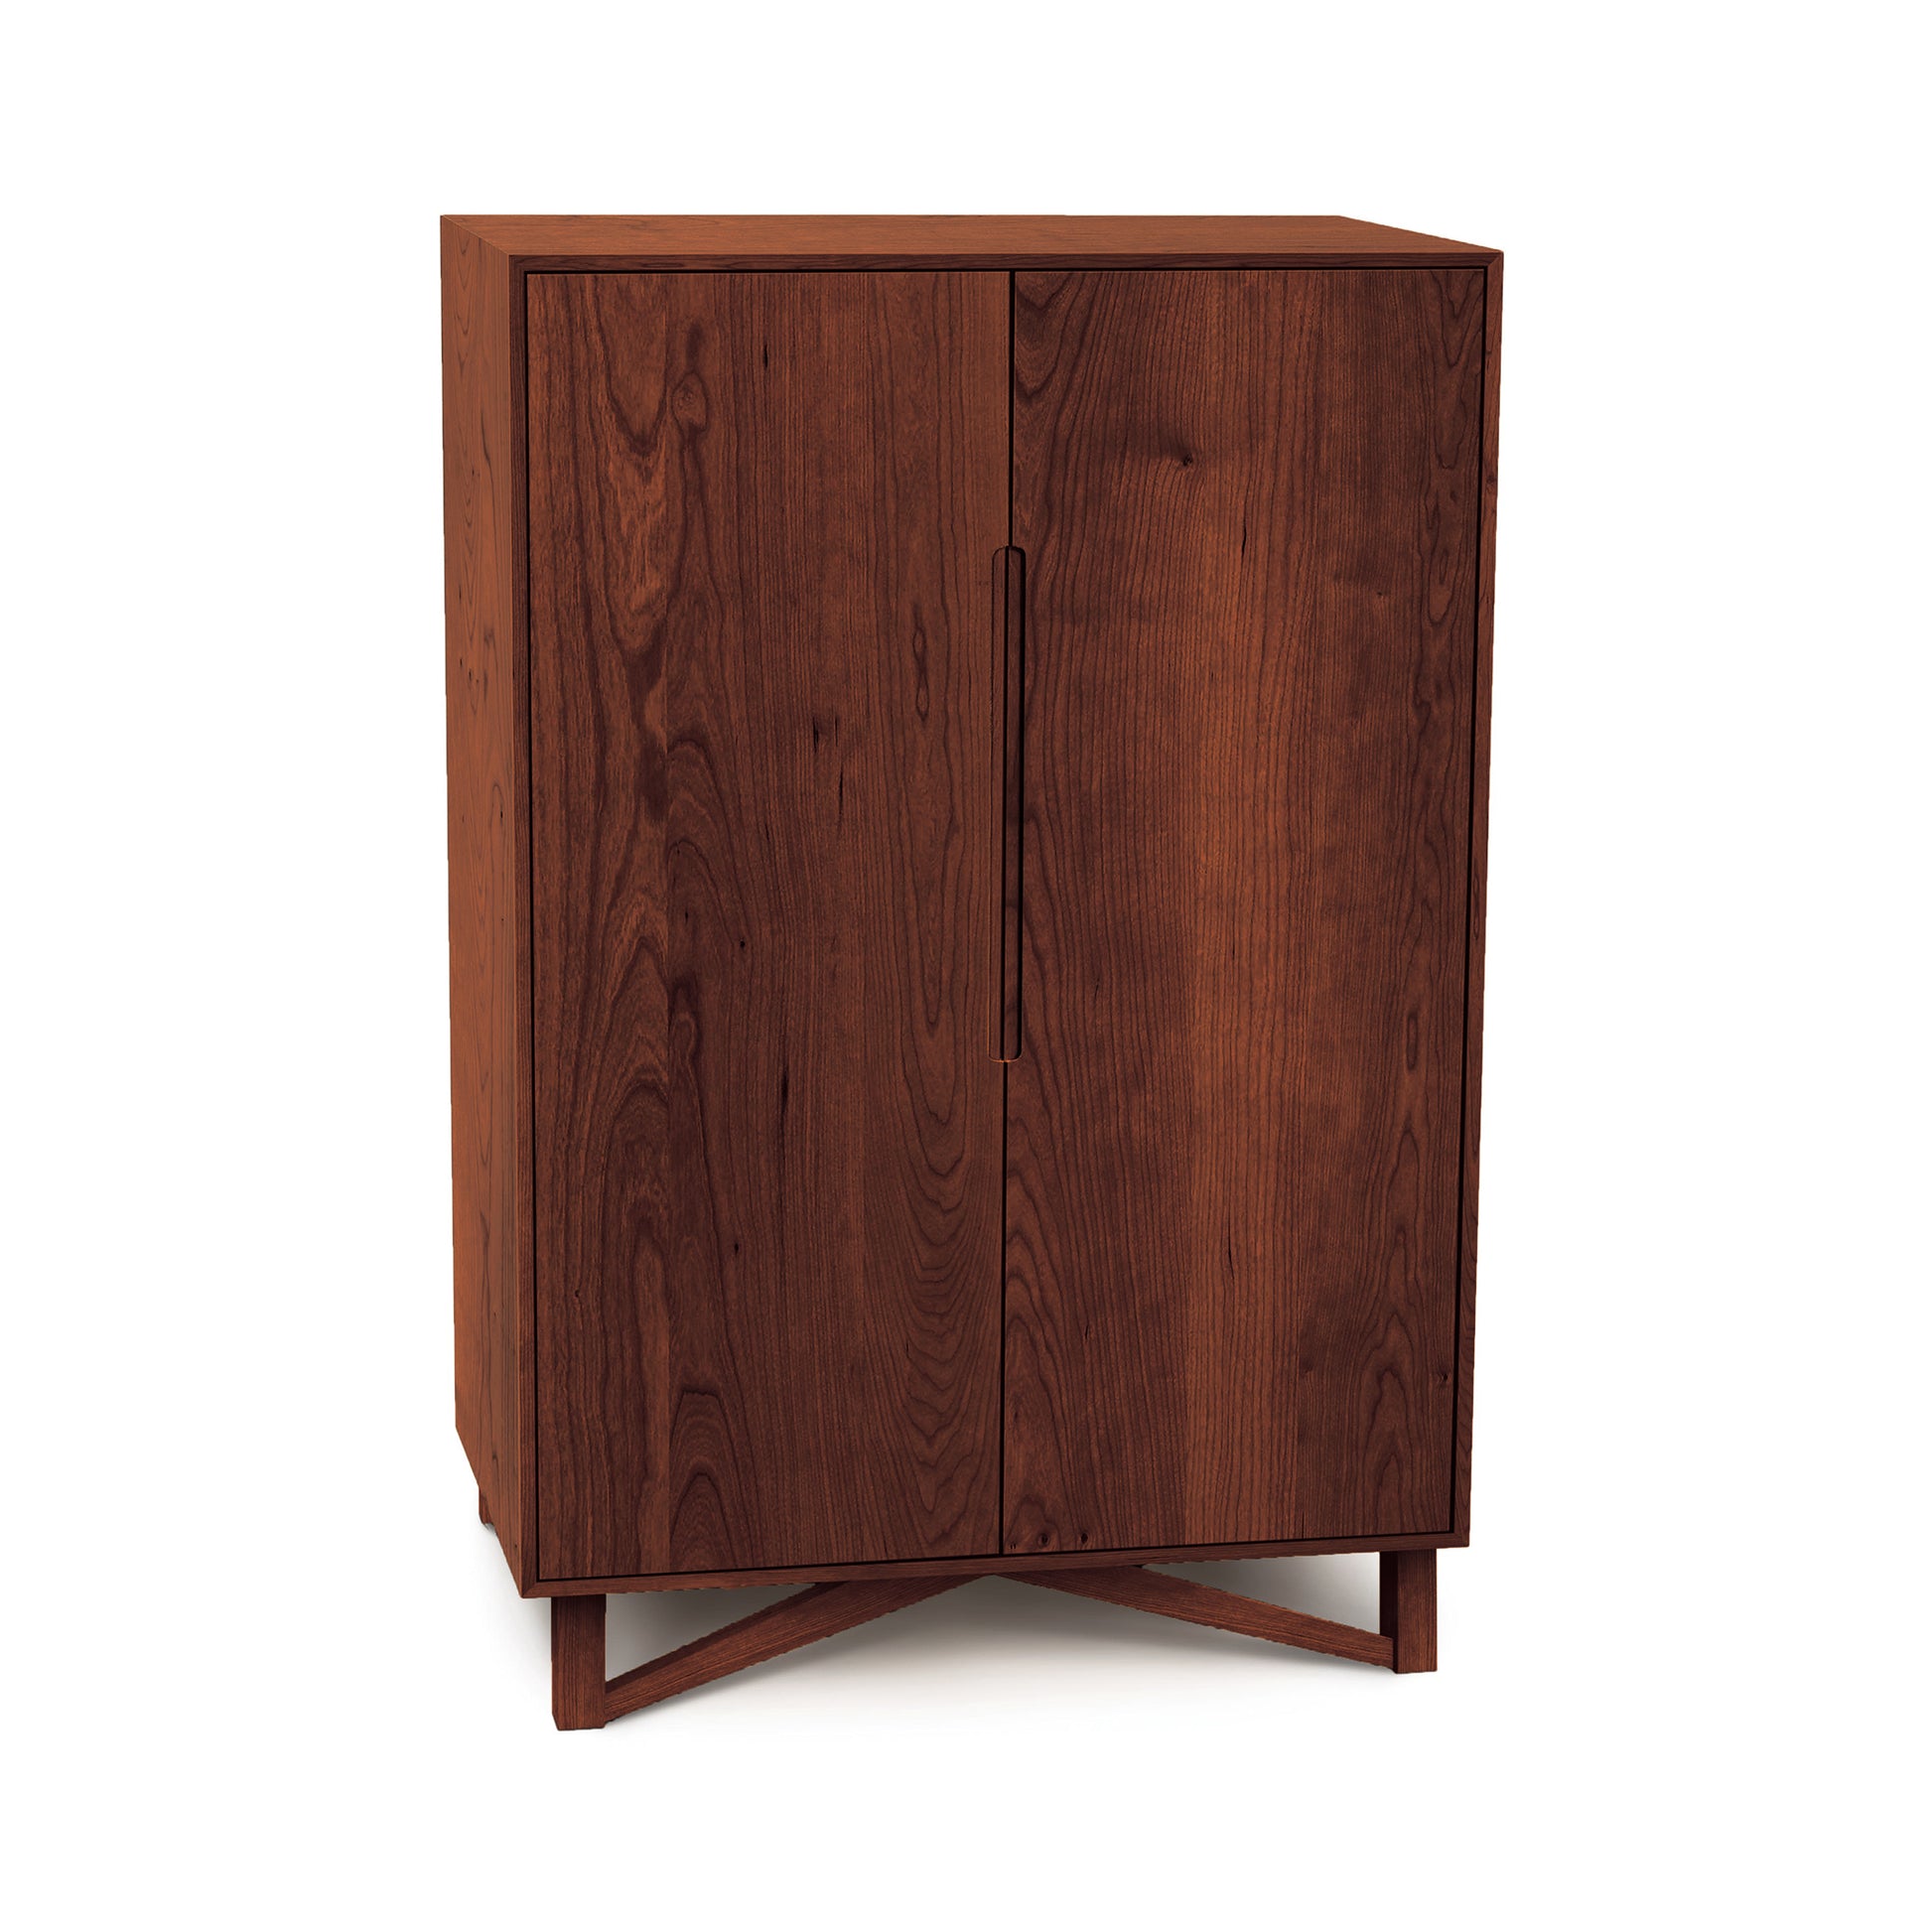 A Copeland Furniture Exeter Bar Cabinet with closed double doors, positioned on angled legs and isolated on a white background.